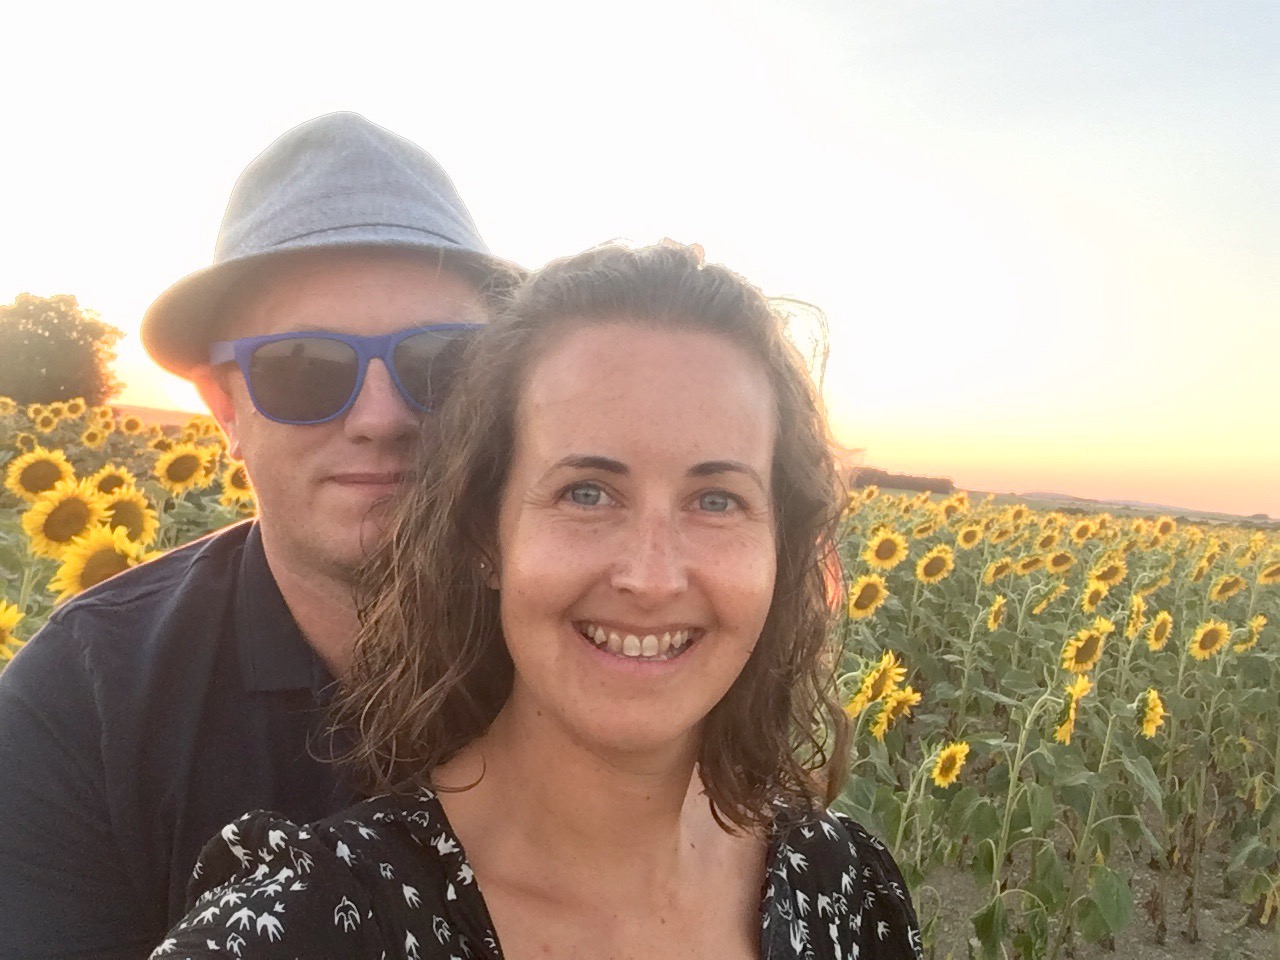 D and I looking at the camera, a field of sunflowers behind us